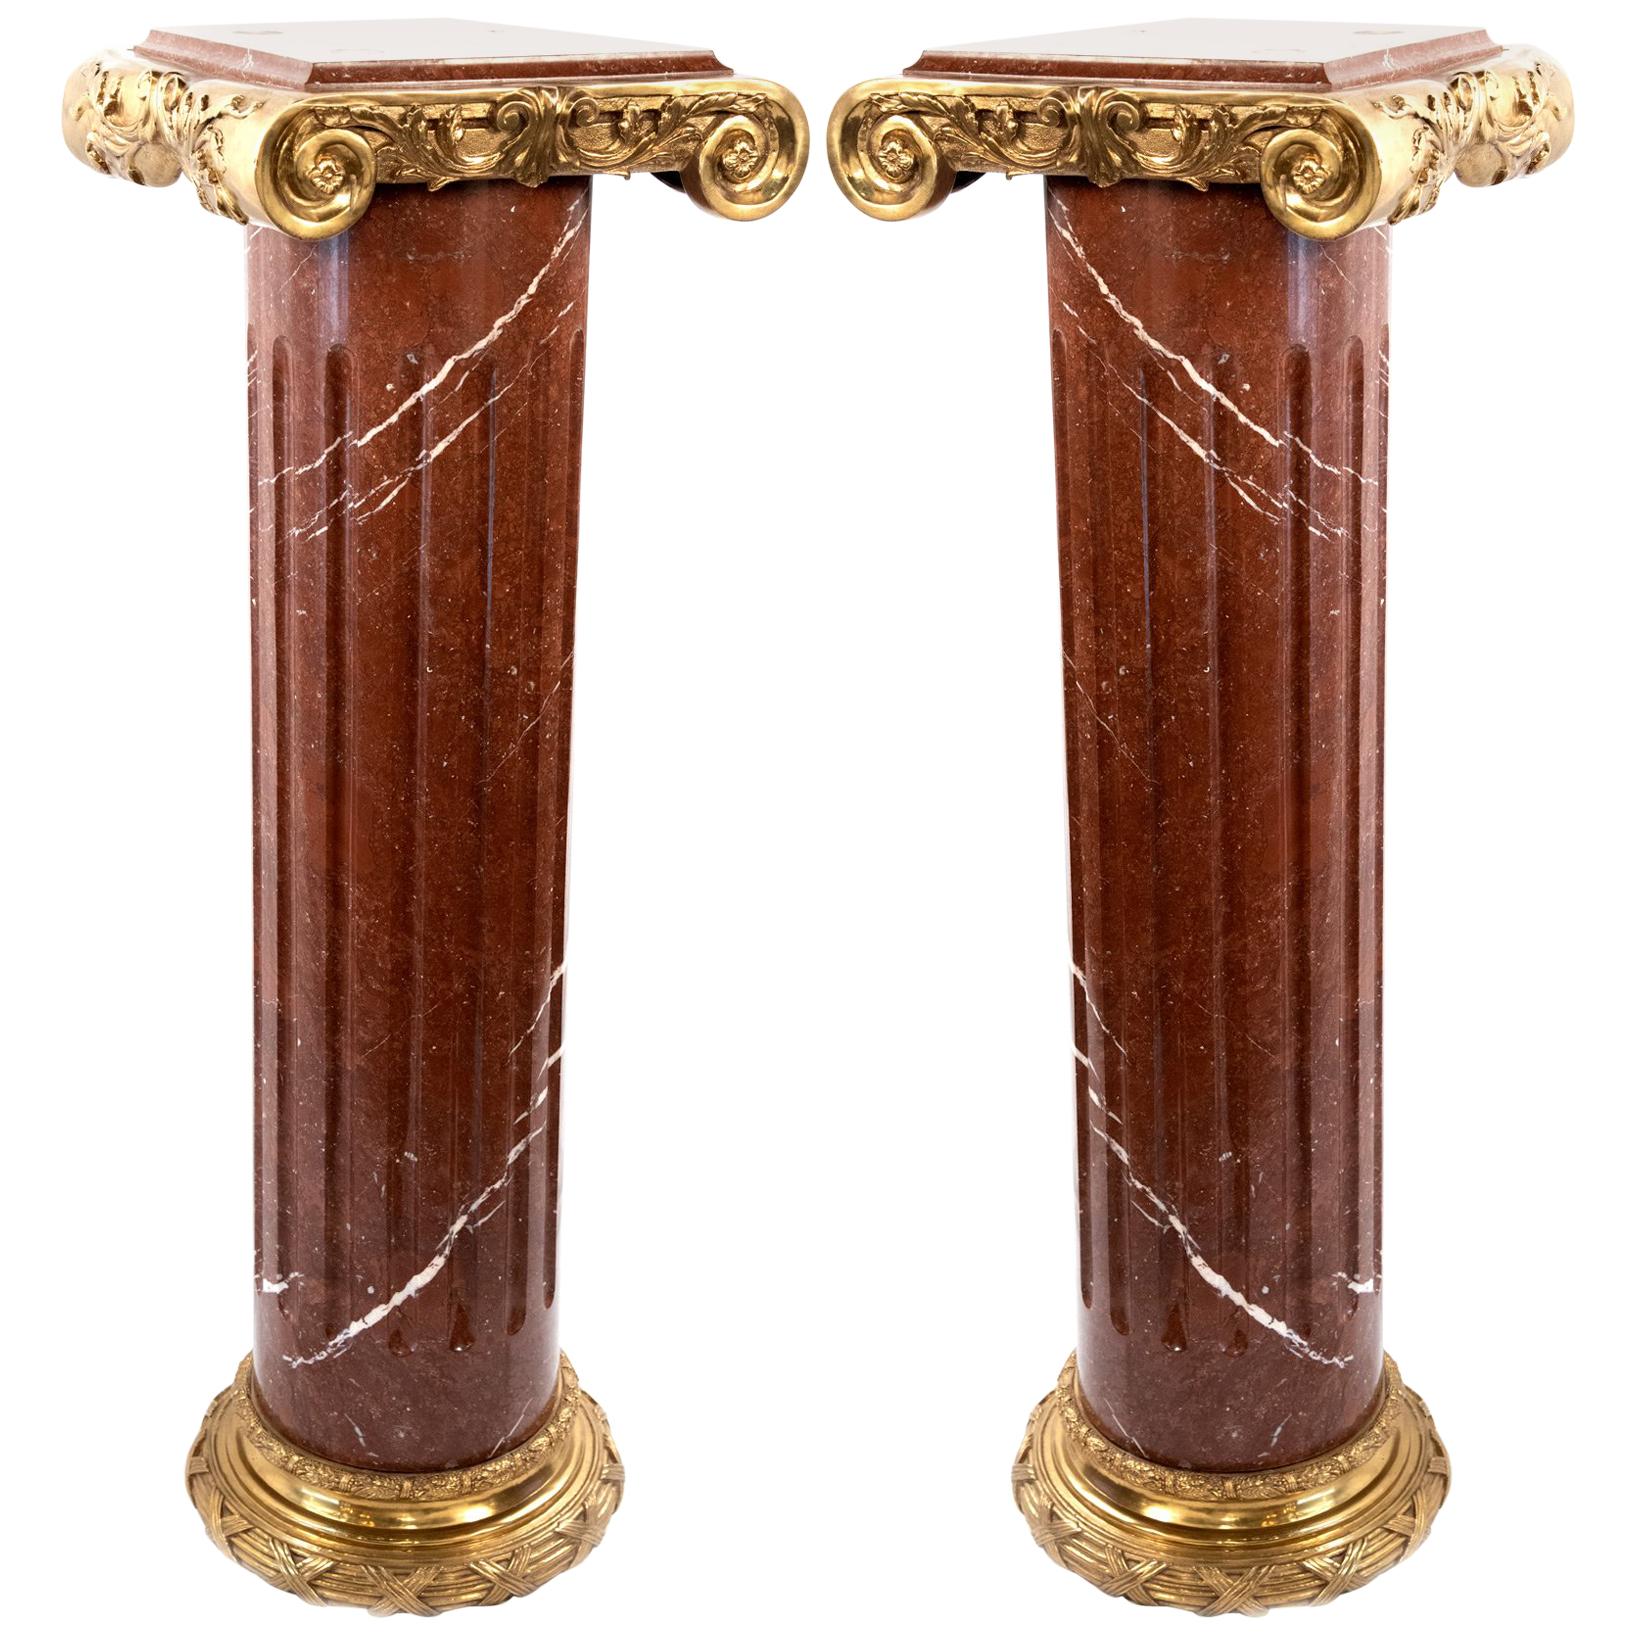 Pair of Marble and Ormolu Pedestals in the Form of an Ionic Pillar